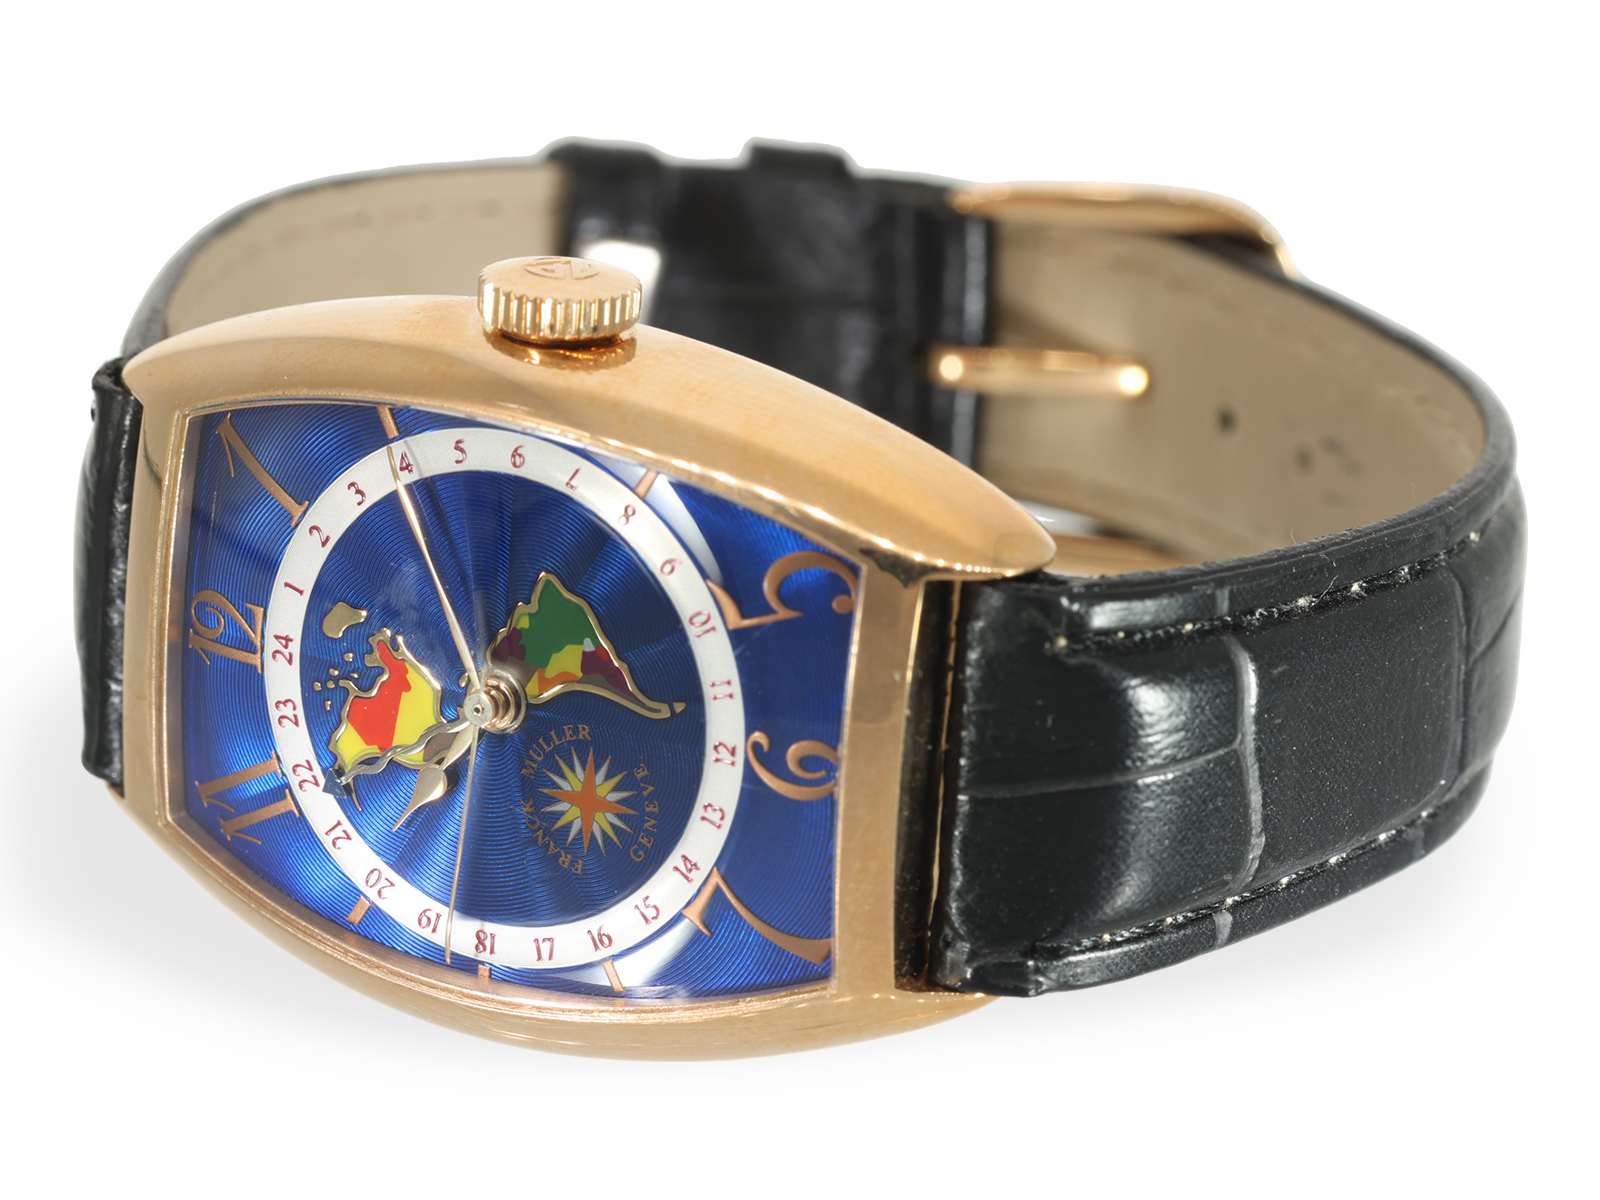 Wristwatch: extremely rare chronometer, Franck Muller Cloisonne "Americas" GMT Ref. 5850 WW, 18K pin - Image 2 of 9